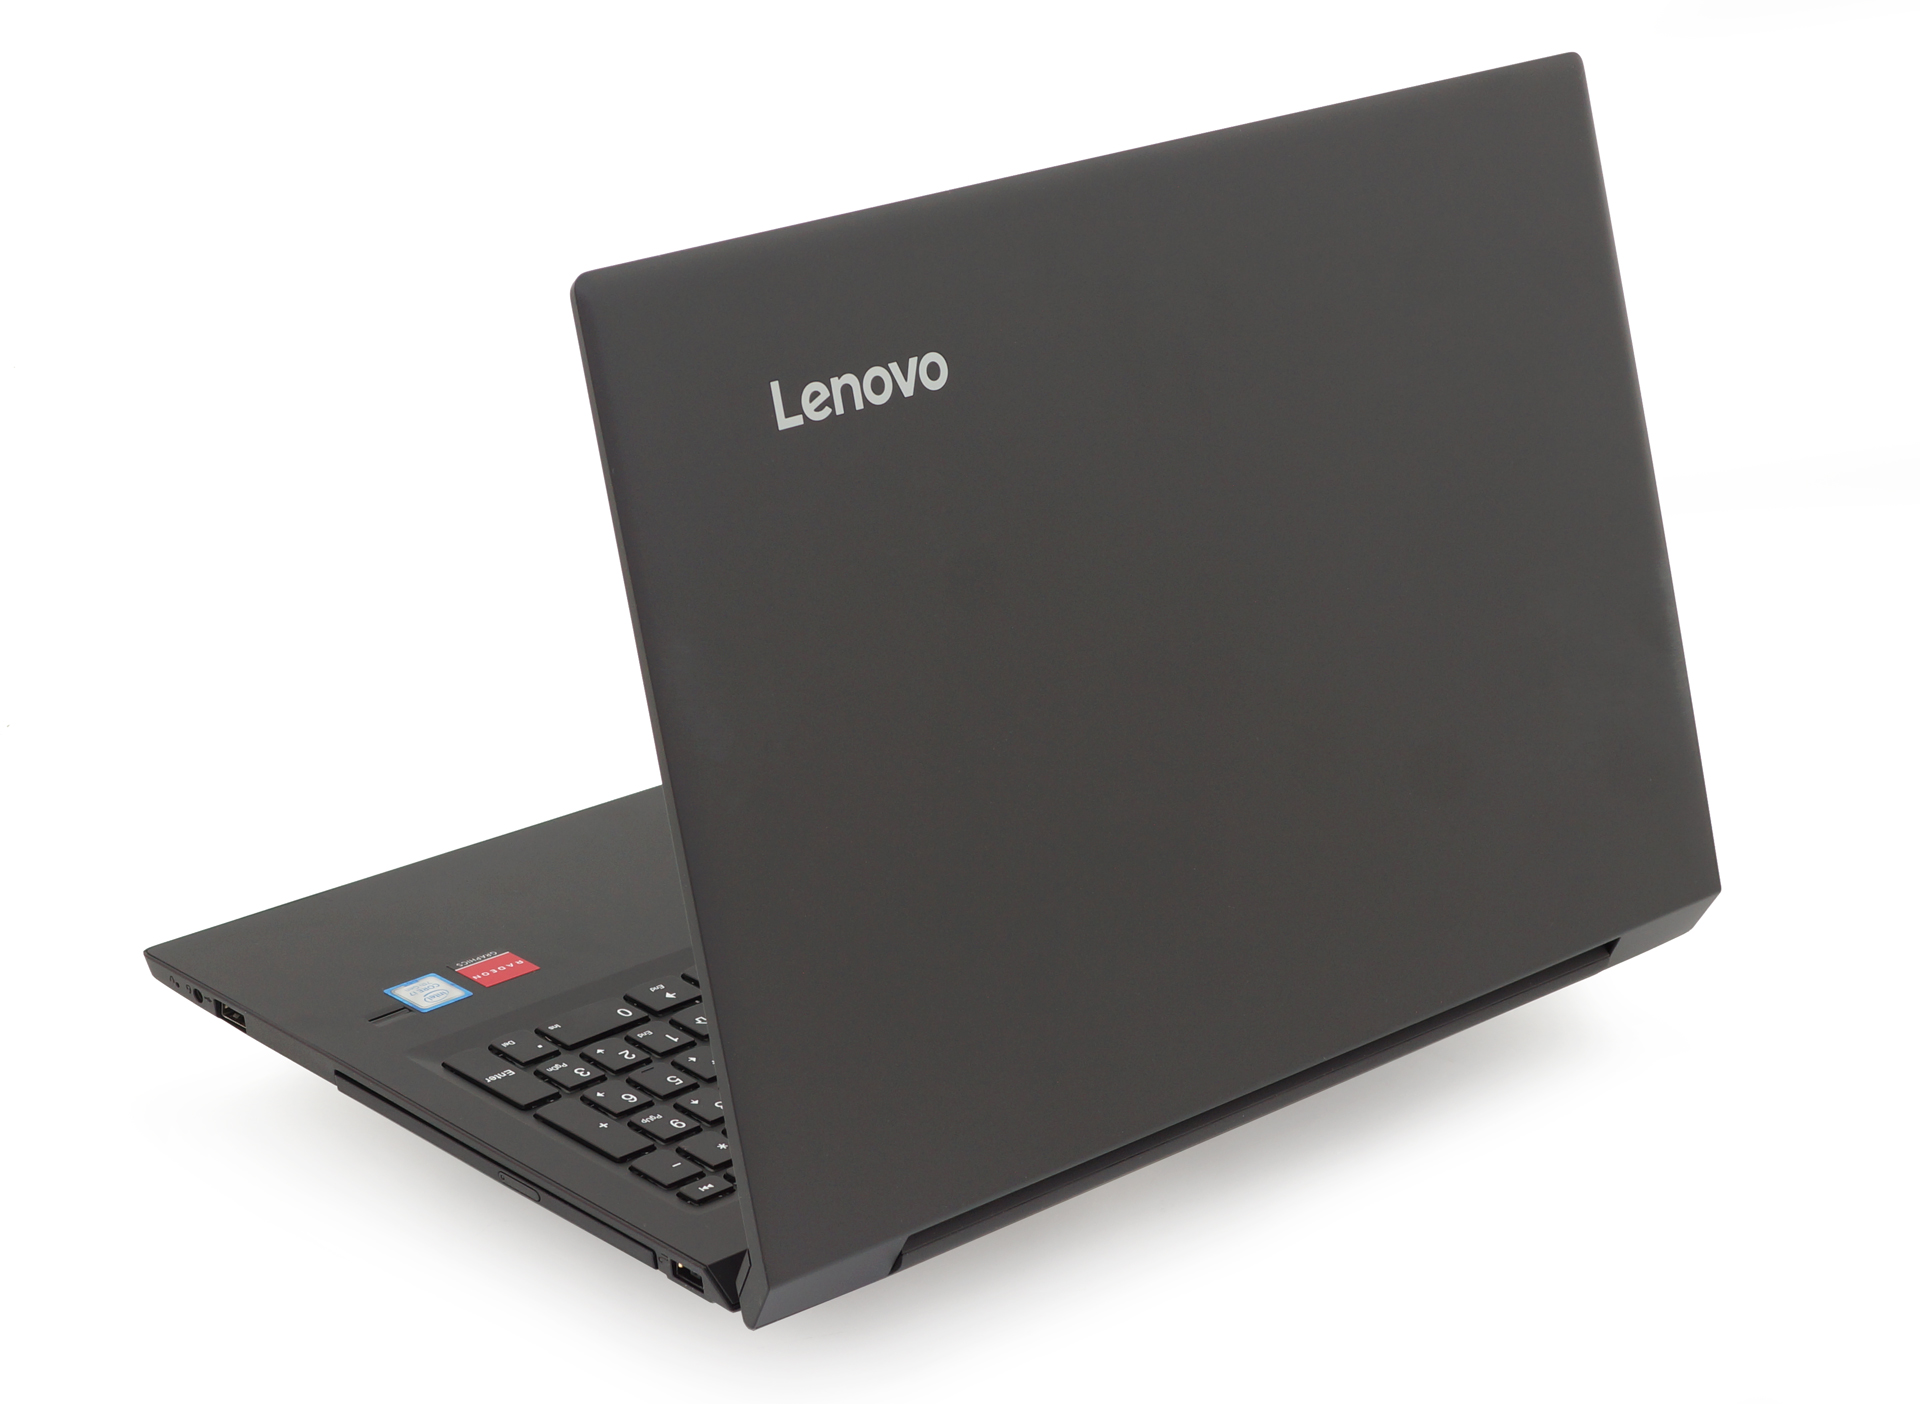 Lenovo V310 (15-inch) review - a wide range of business